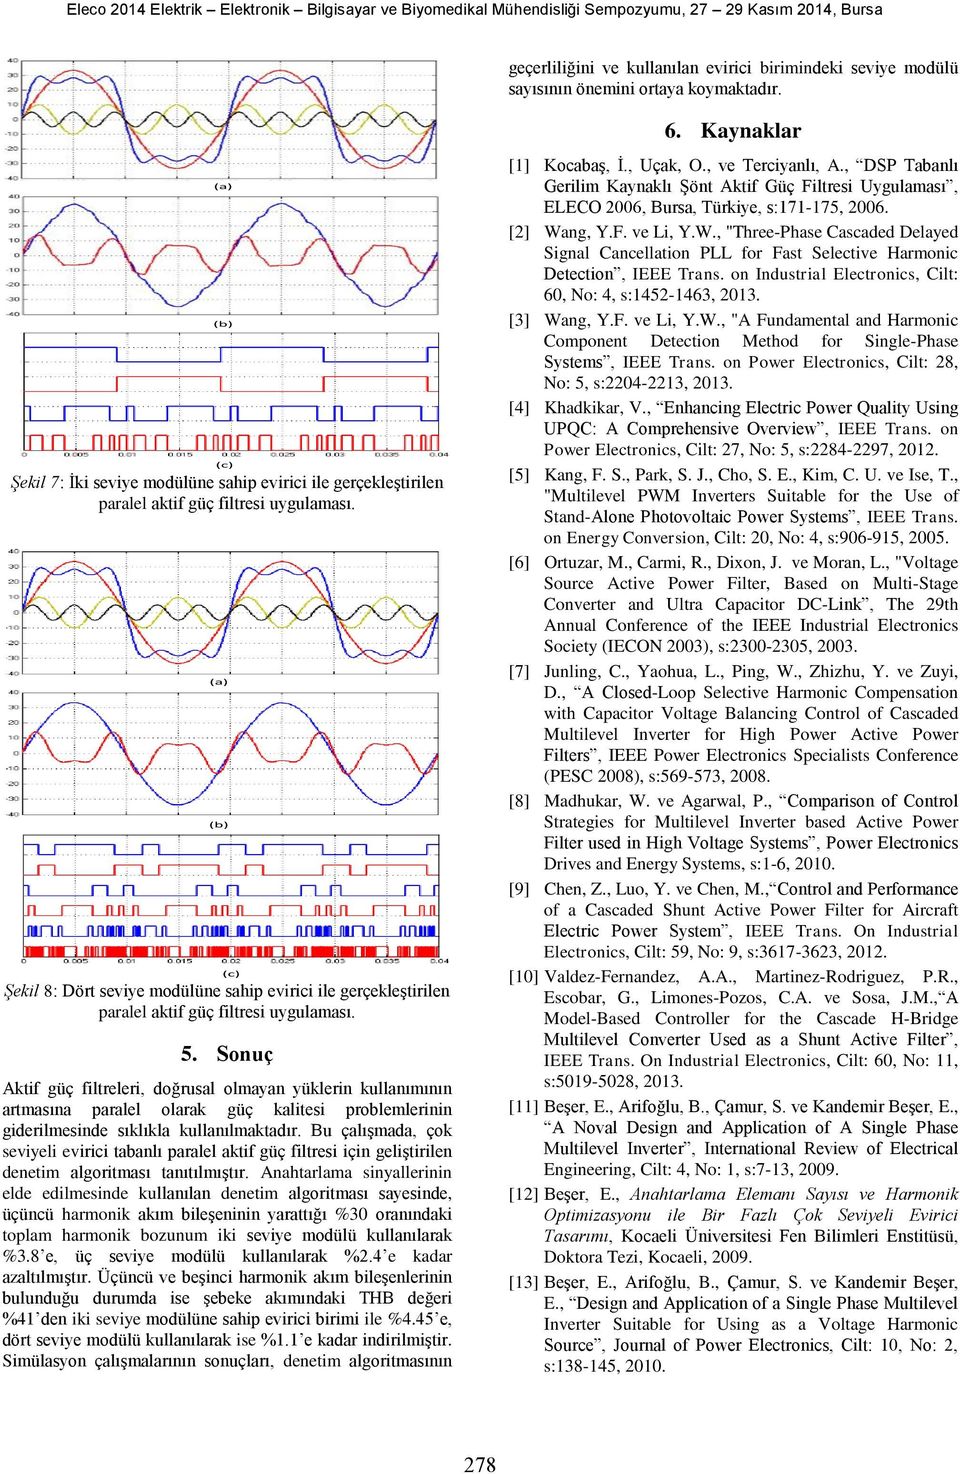 W., "Three-Phase Cascaded Delayed Signal Cancellation PLor Fast Selective Harmonic Detection, IEEE Trans. on Industrial Electronics, Cilt: 60, No: 4, s:1452-1463, 2013. [3] Wang, Y.F. ve Li, Y.W., "A Fundamental and Harmonic Component Detection Method for Single-Phase Systems, IEEE Trans.